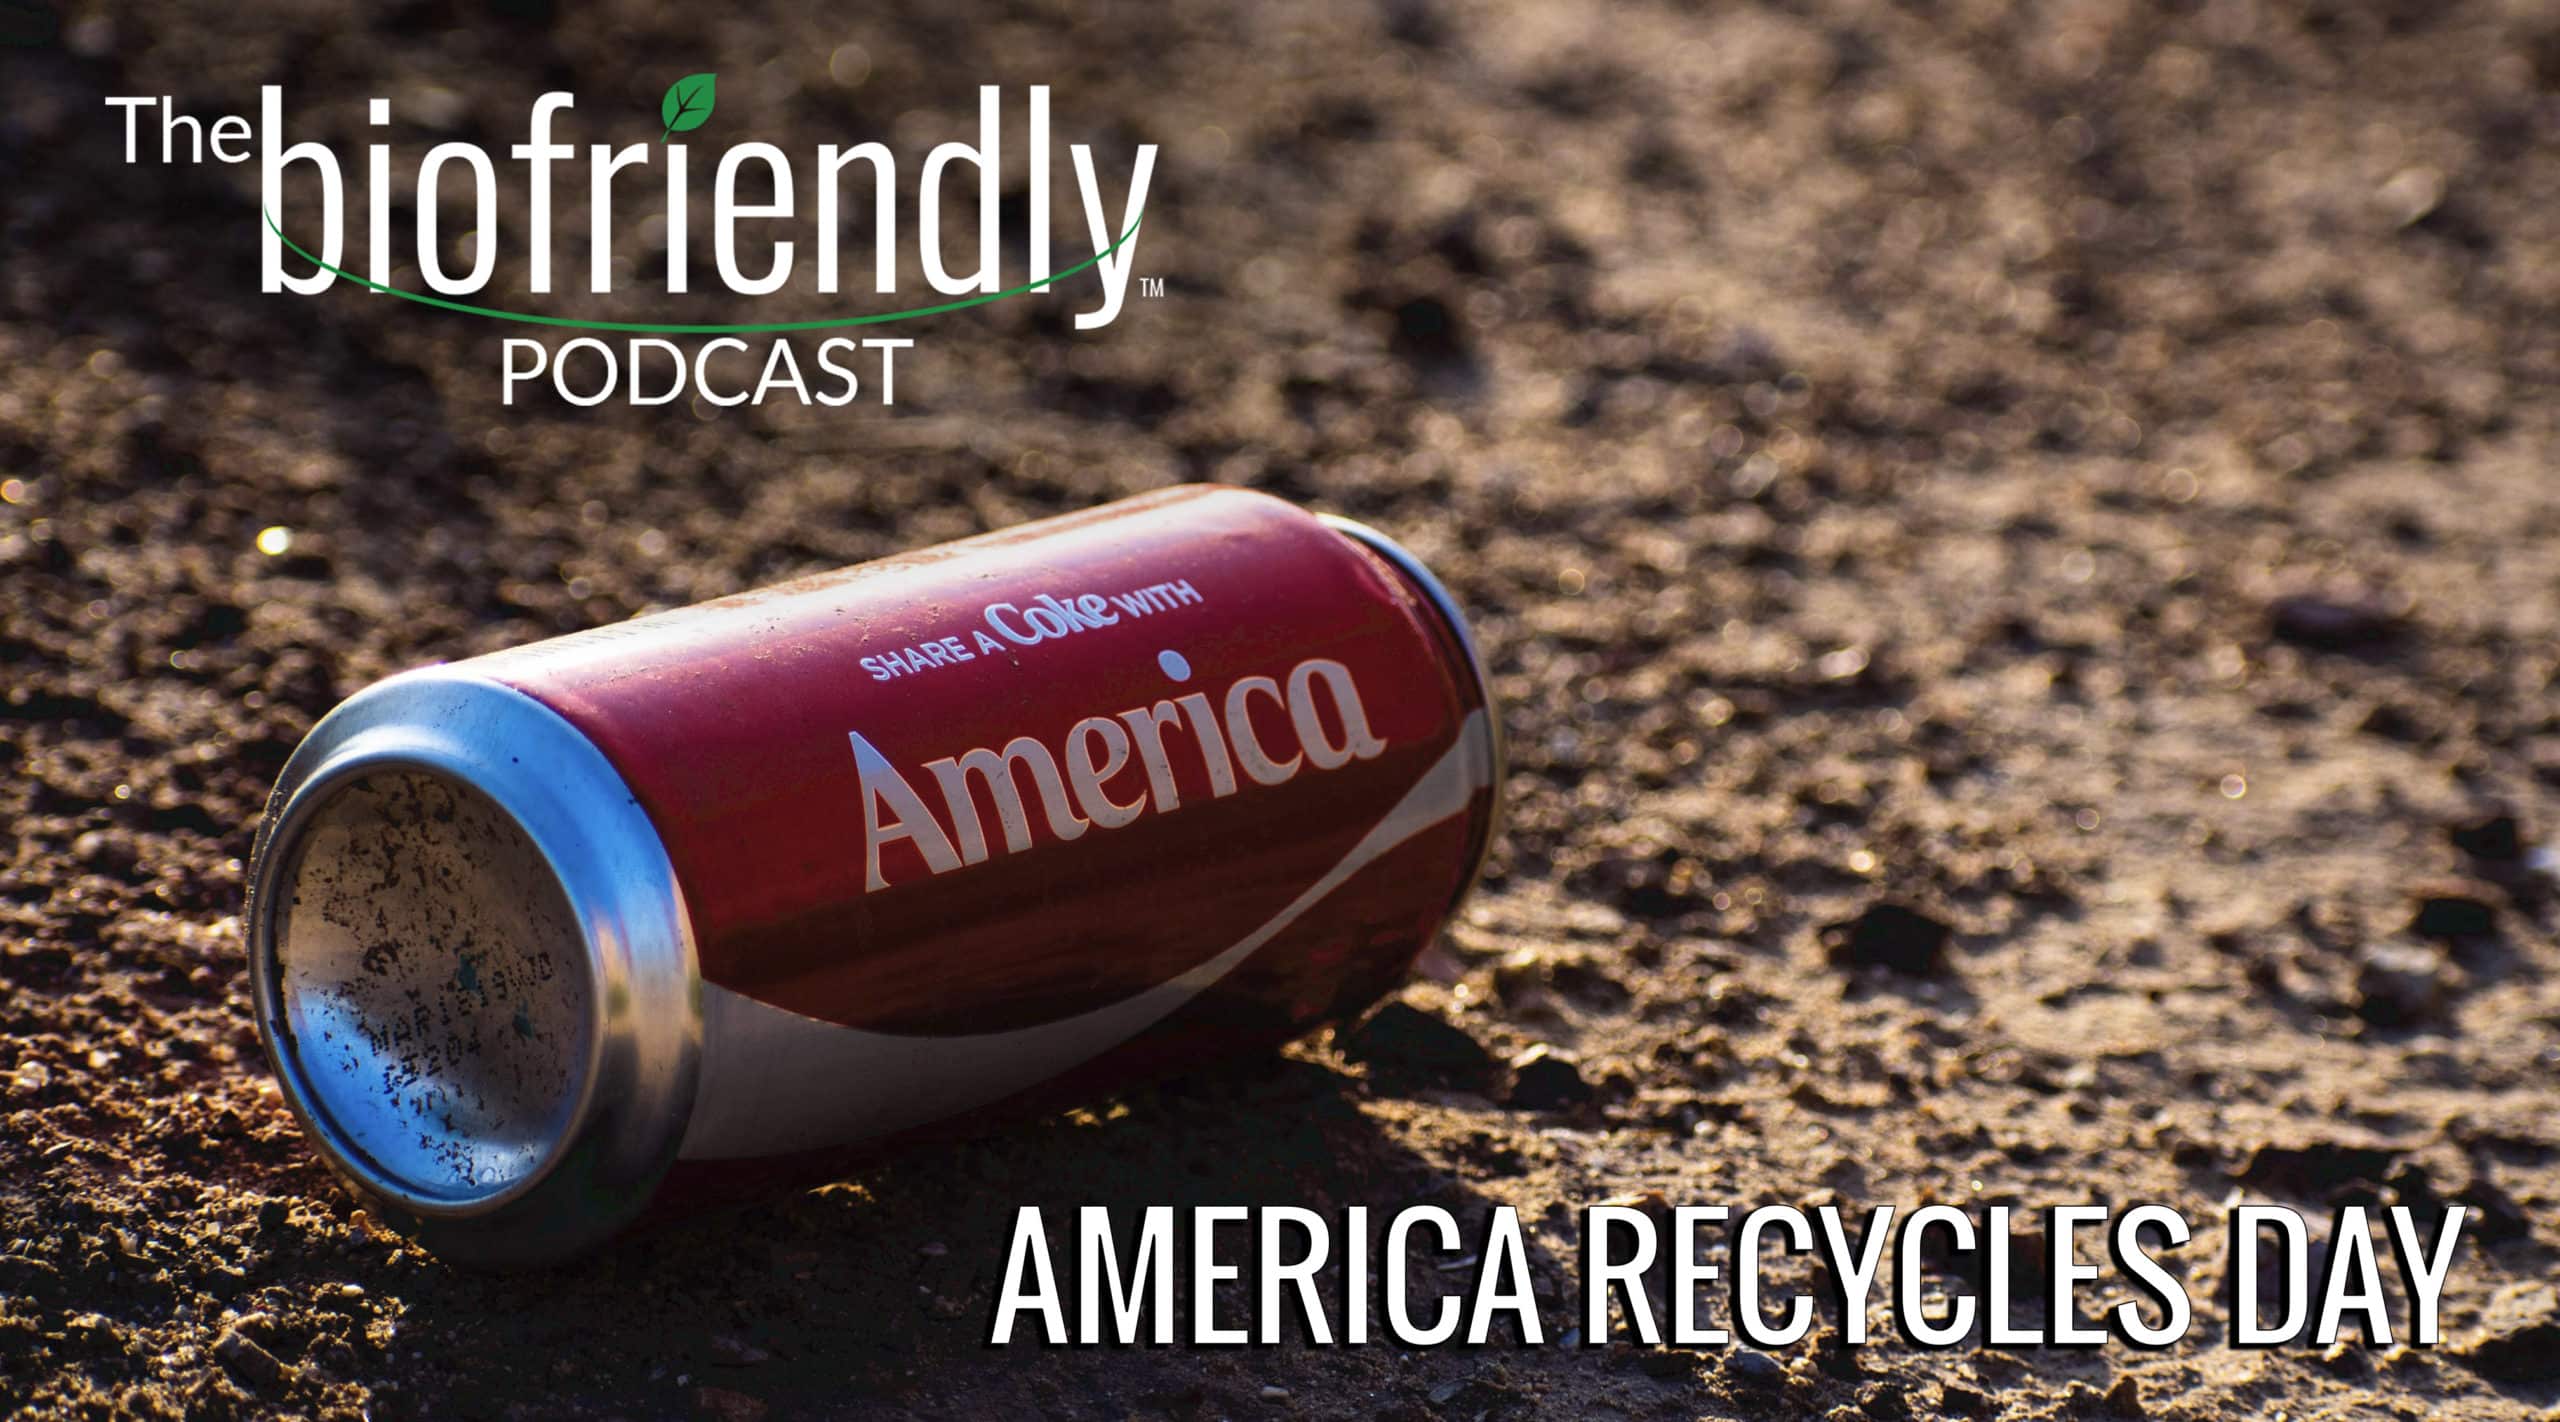 The Biofriendly Podcast - Episode 40 - America Recycles Day